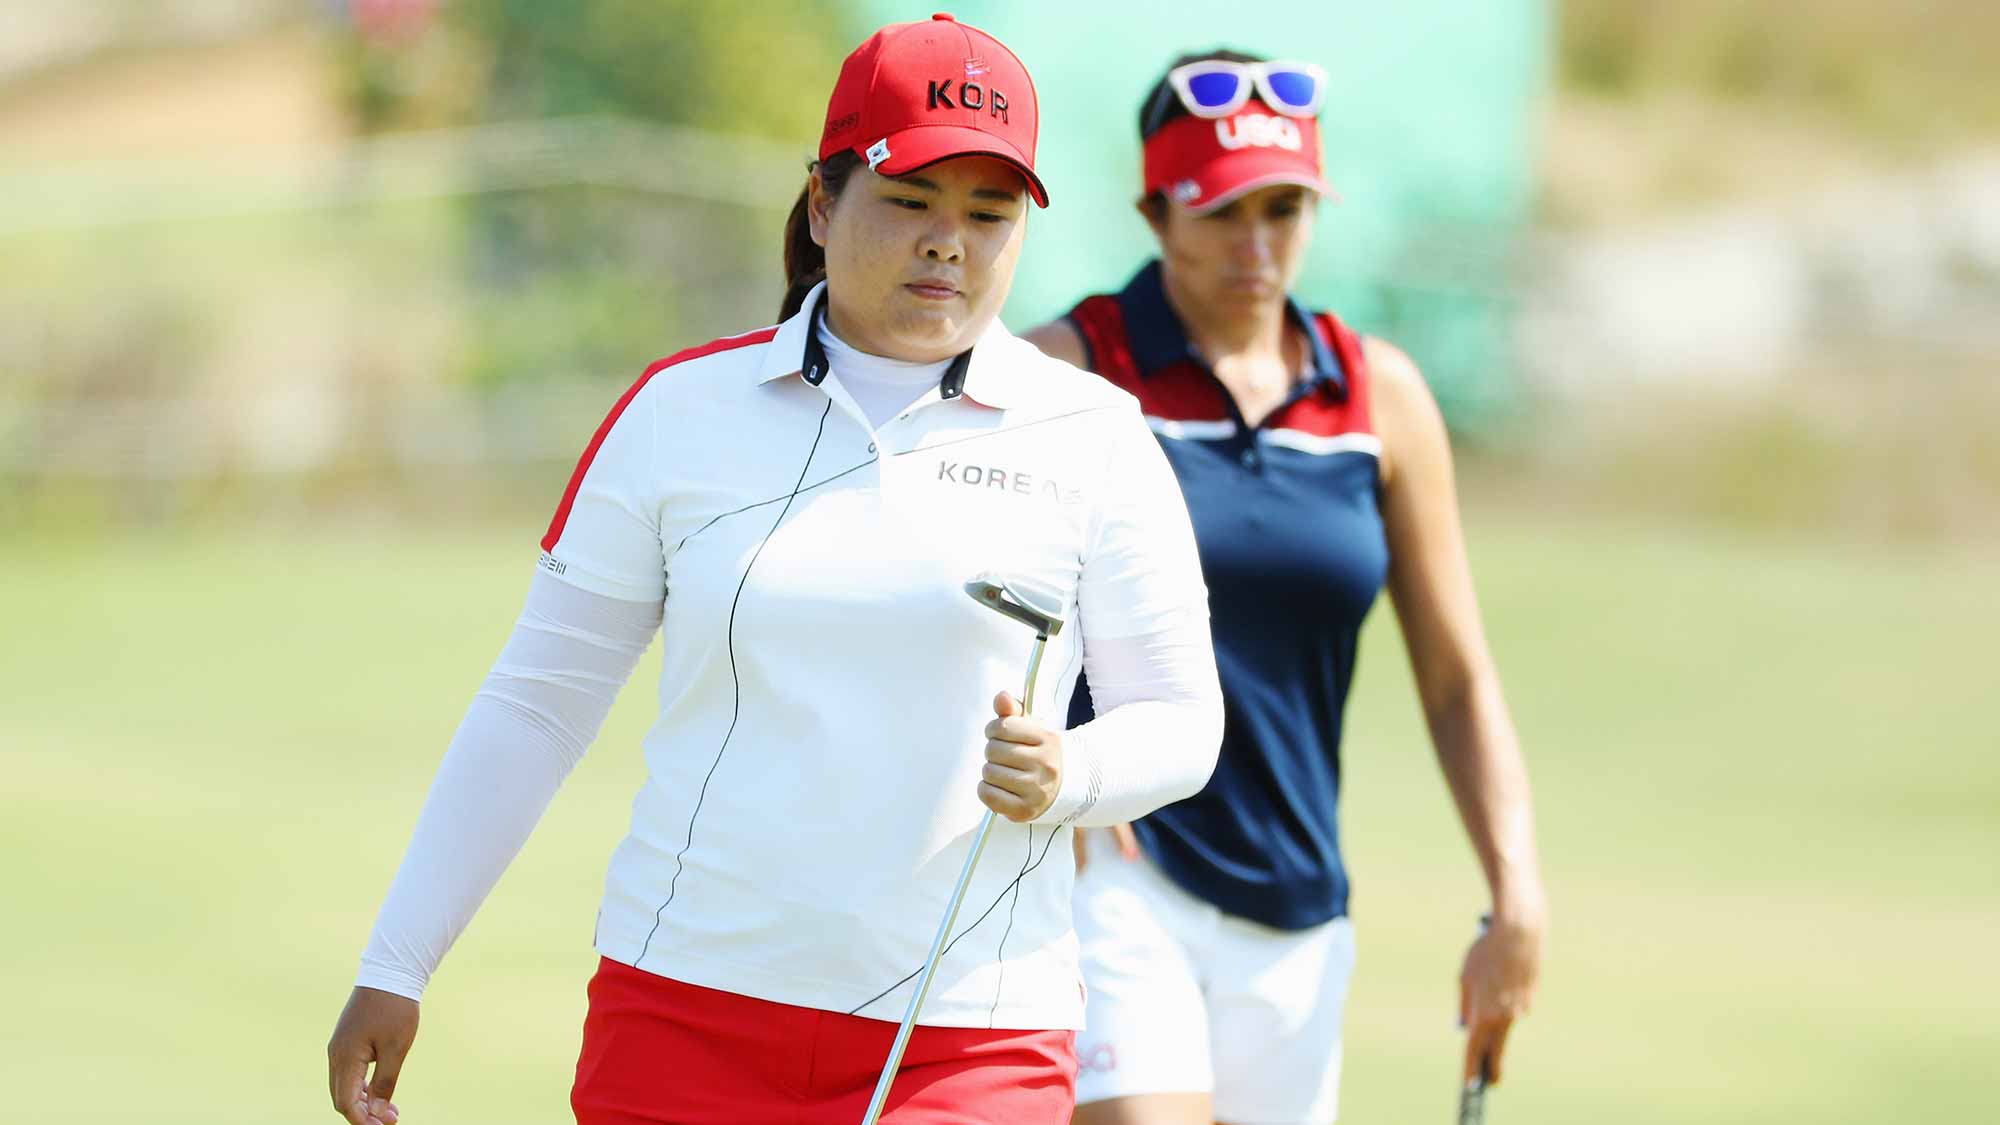 Inbee Park of Korea (L) and Gerina Piller of the United States wait on the seventh green during the second round of the Women's Individual Stroke Play golf on Day 13 of the Rio 2016 Olympic Games at Olympic Golf Course 